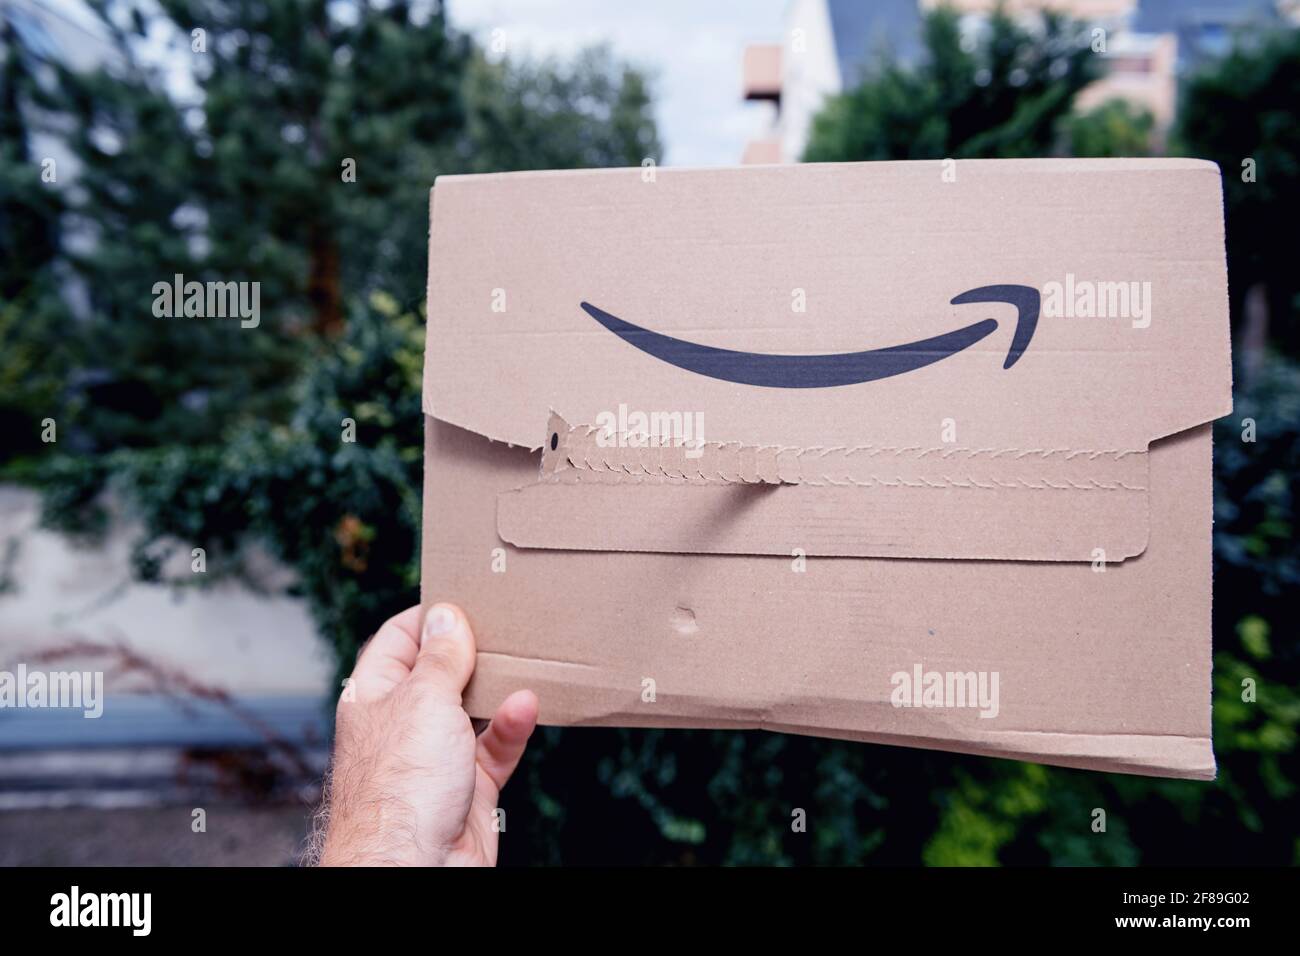 Pov male hand holding new package of Amazon Prime cardboard package Stock Photo